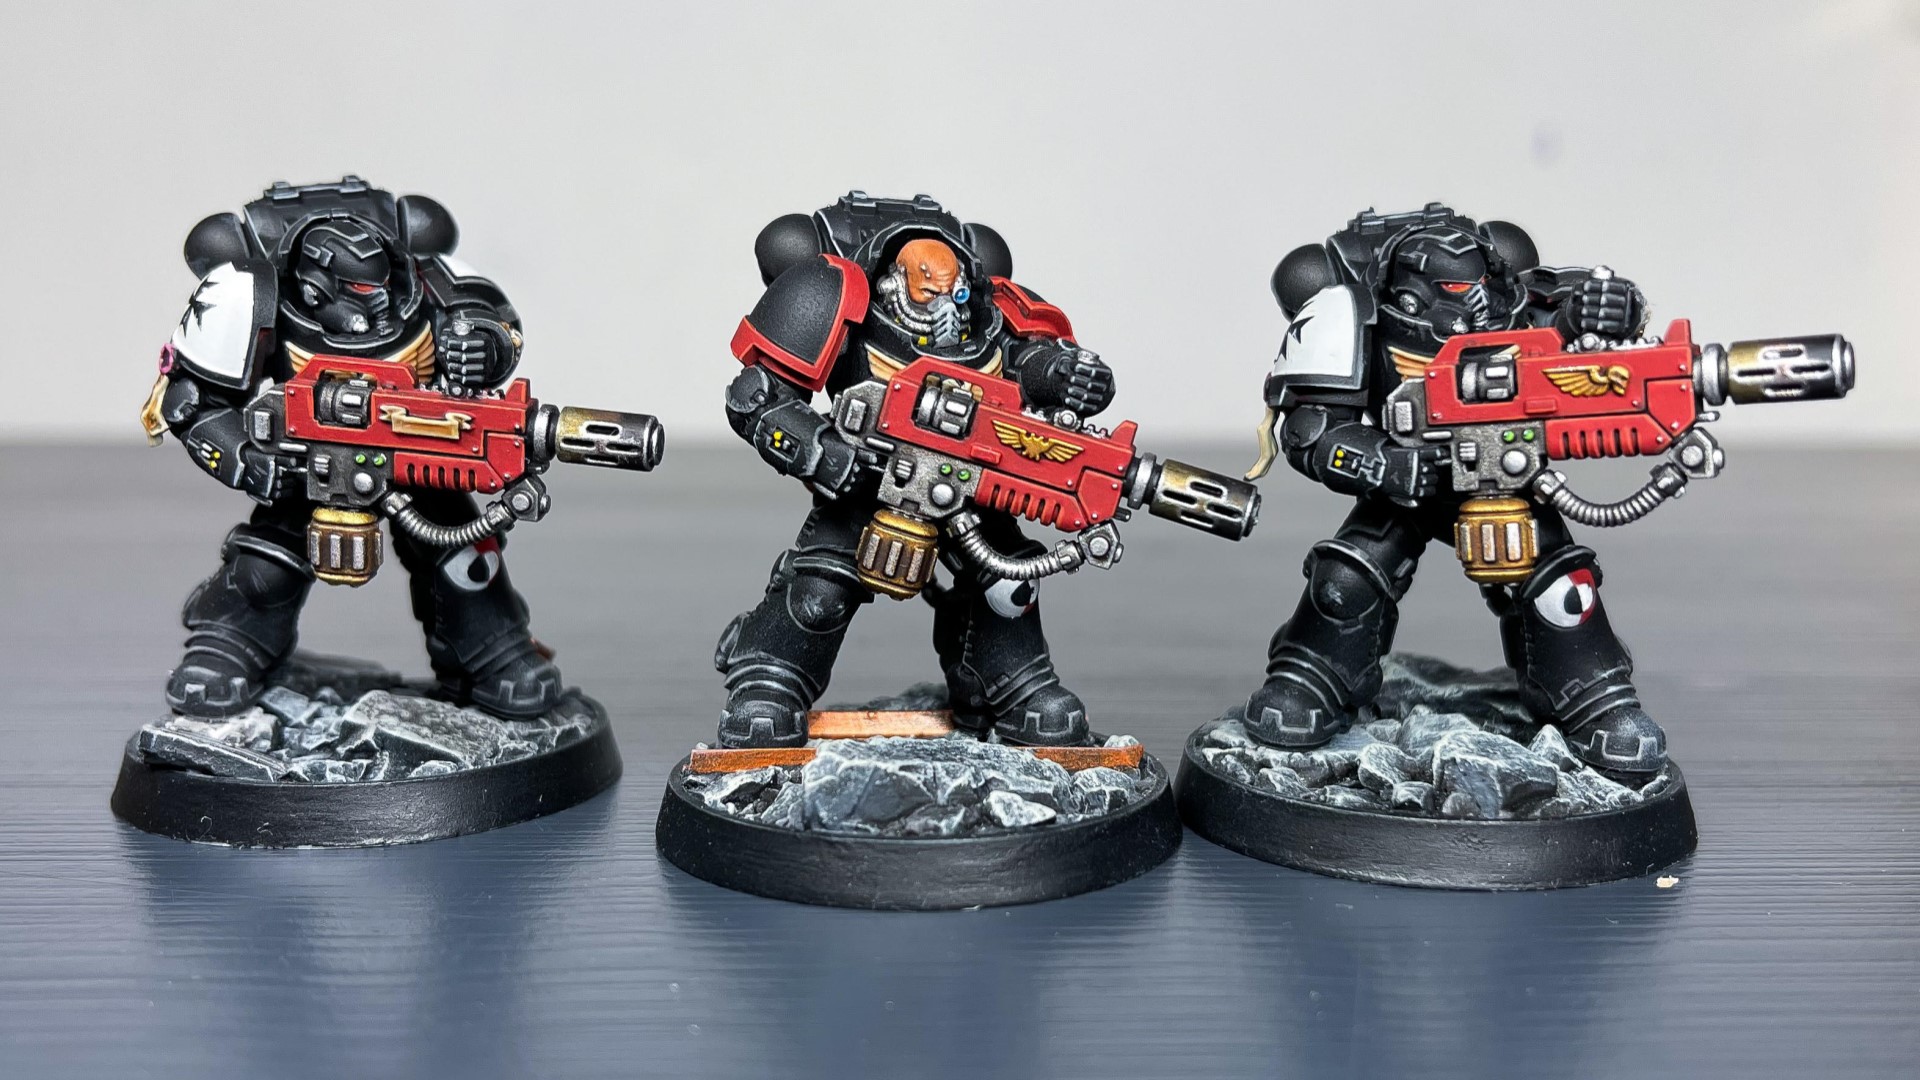 Best paints for miniatures - Photo by the author of Black Templars Eradicator models painted using Vallejo Model Colour black